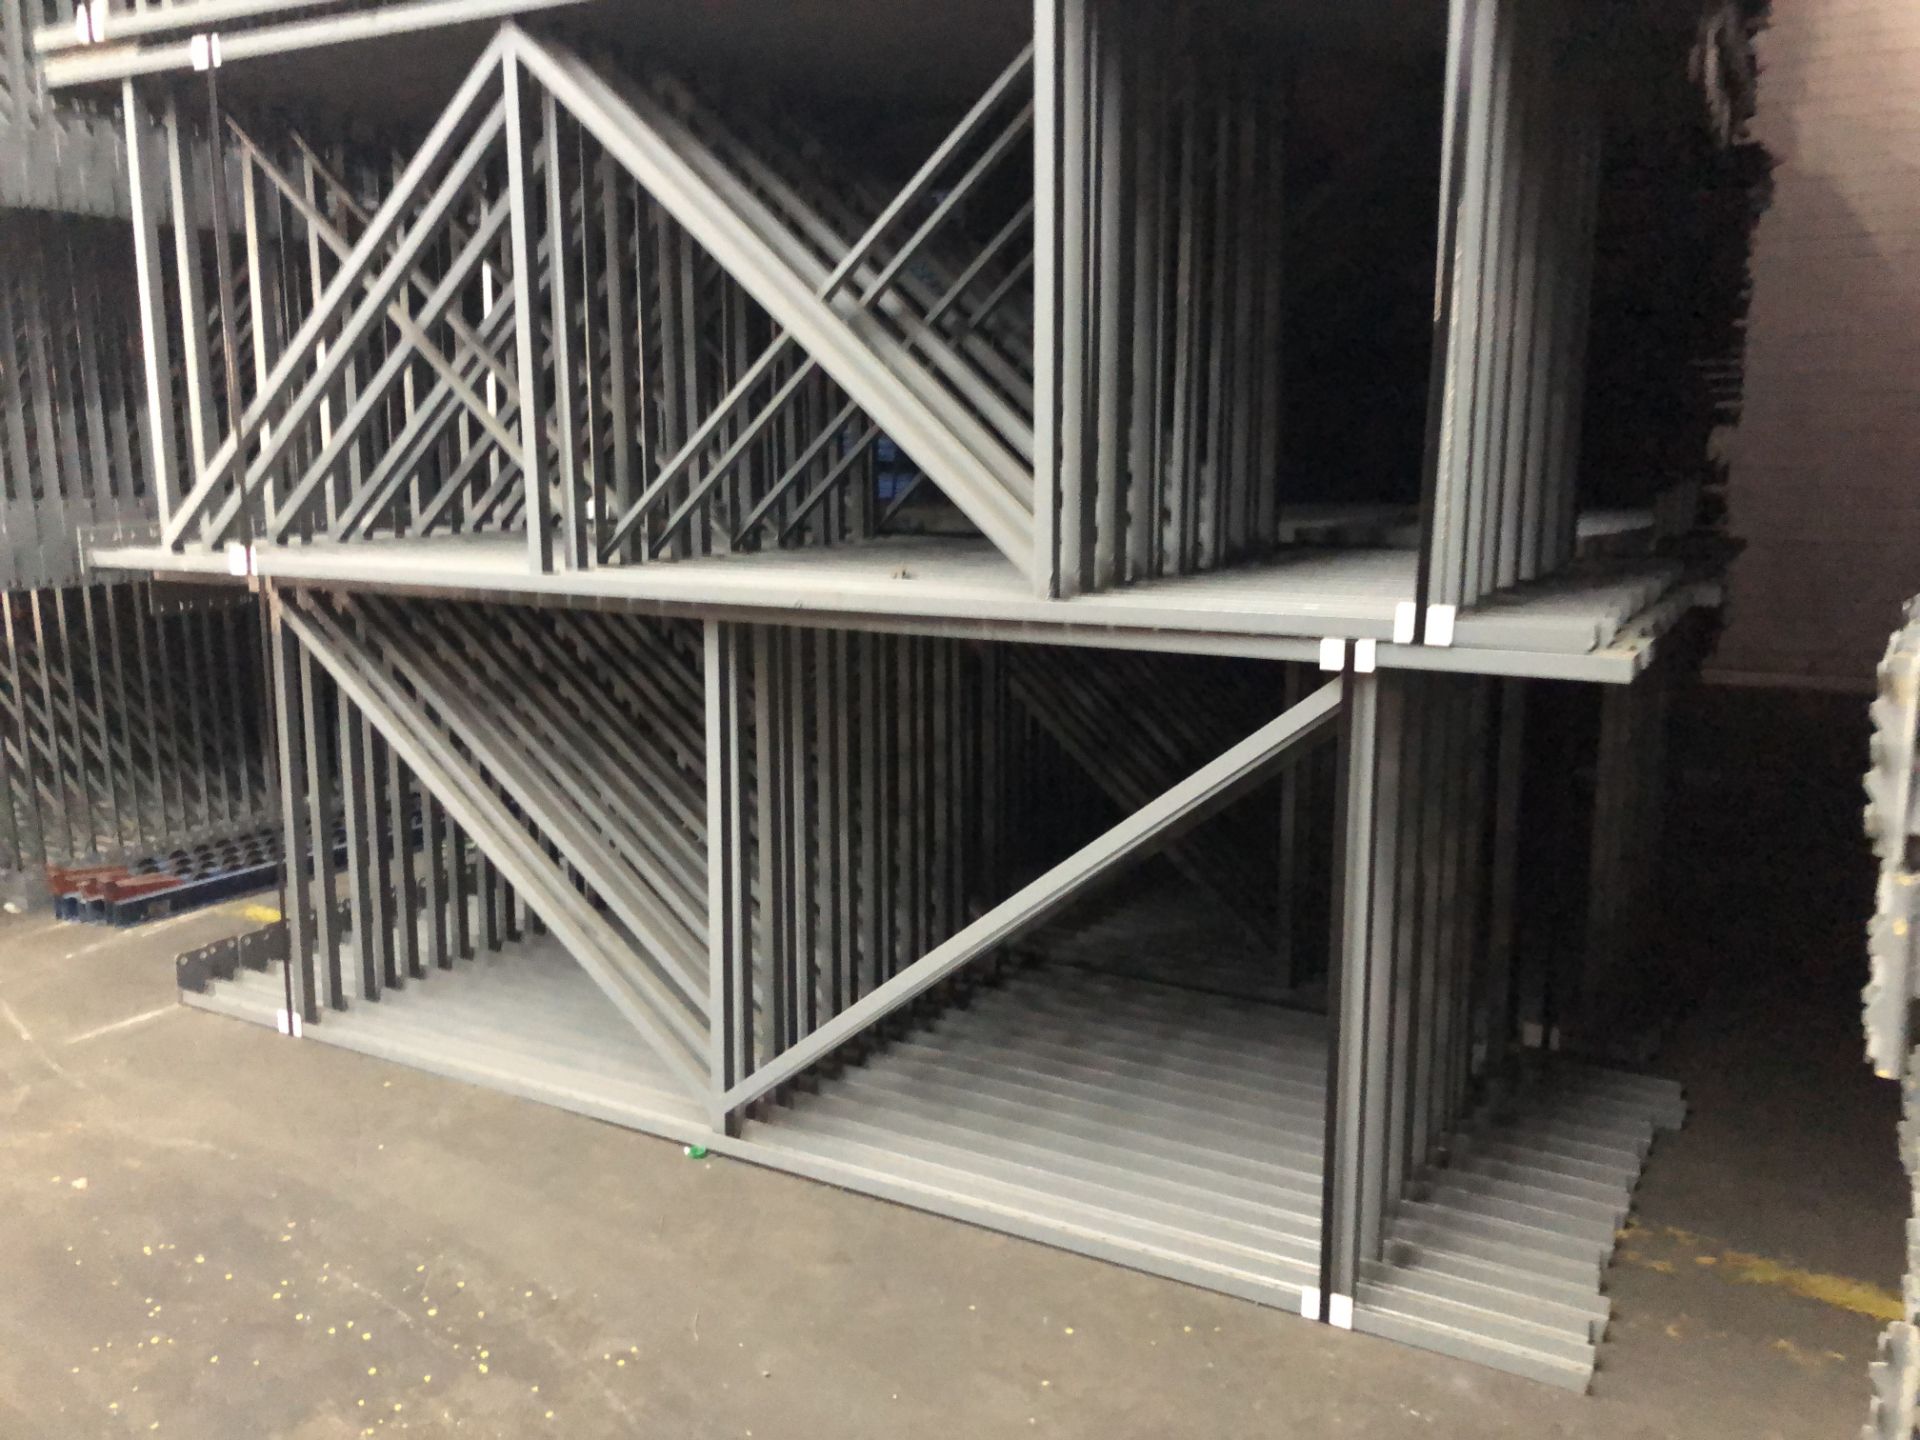 14 BAYS OF 10.5'H X 42"D X 102"L STRUCTURAL STYLE PALLET RACKS - Image 4 of 6